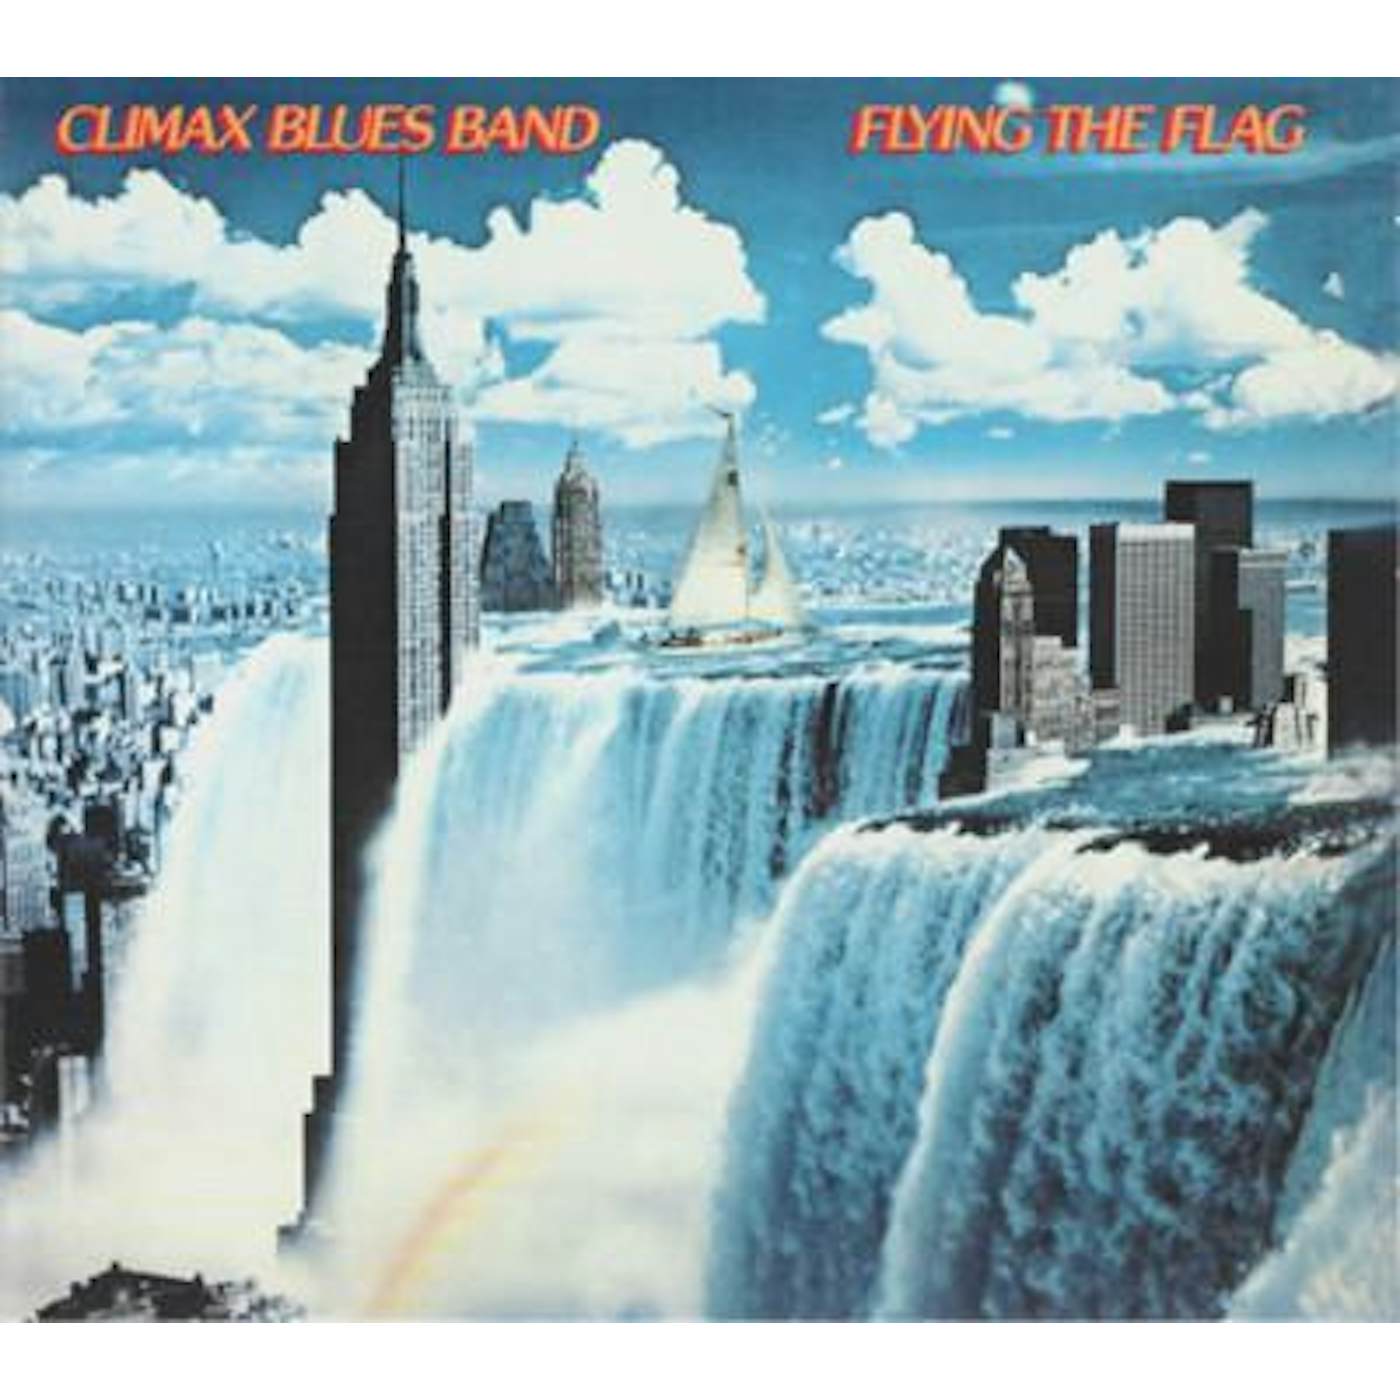 Climax Blues Band FLYING THE FLAG CD